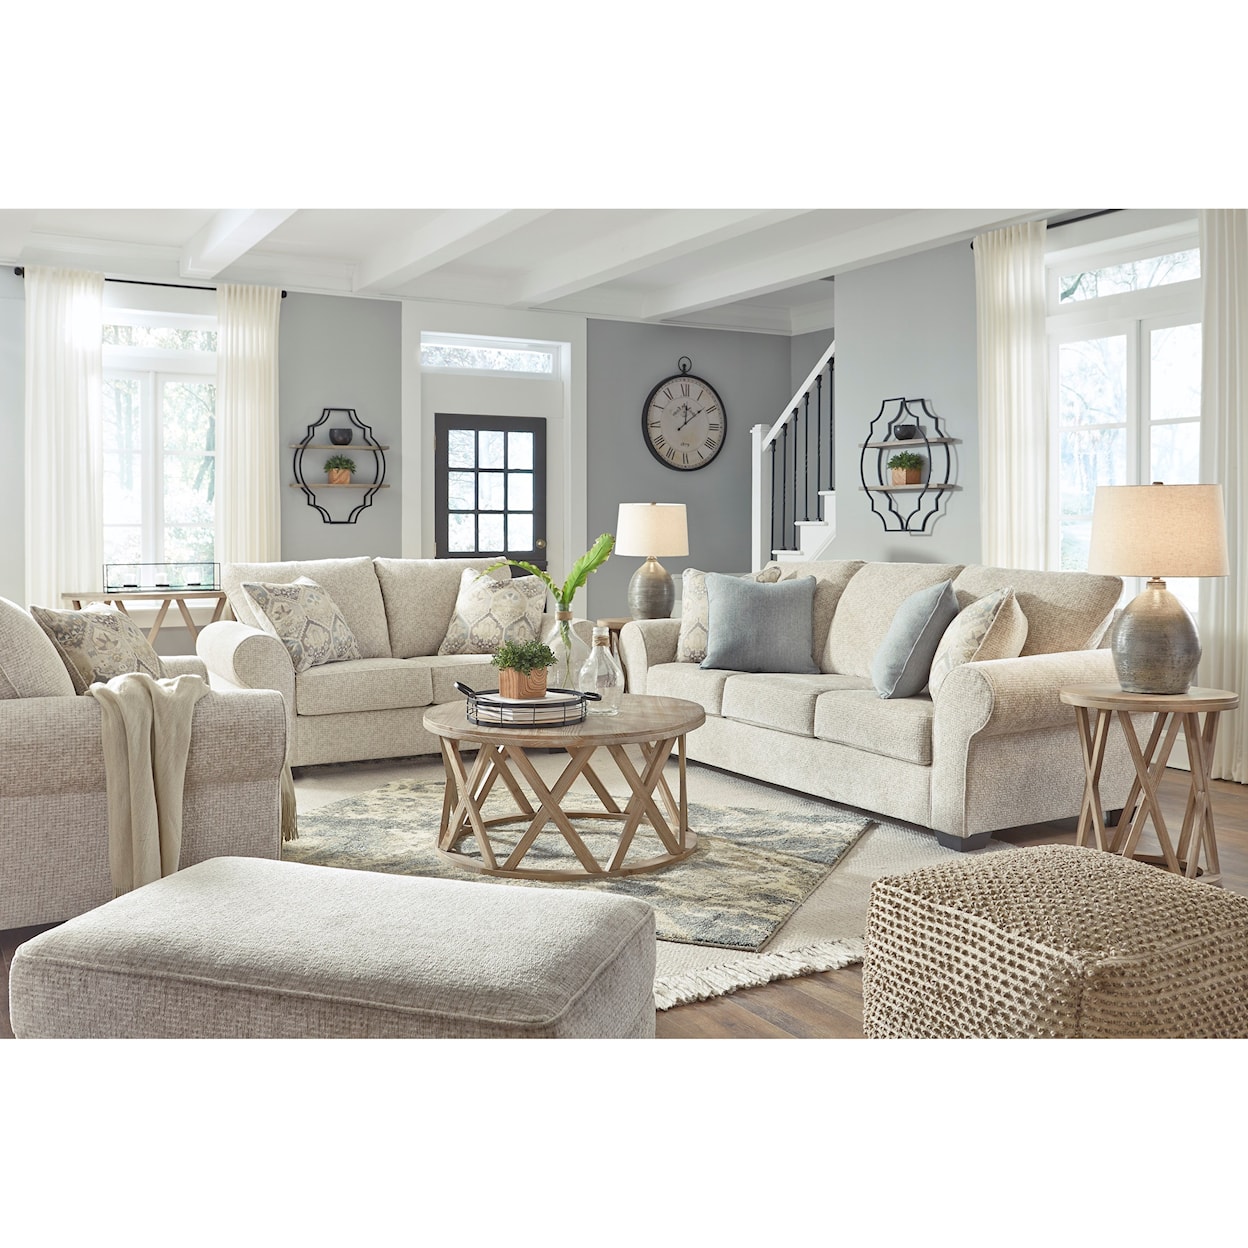 Benchcraft Haisley 4pc living room group